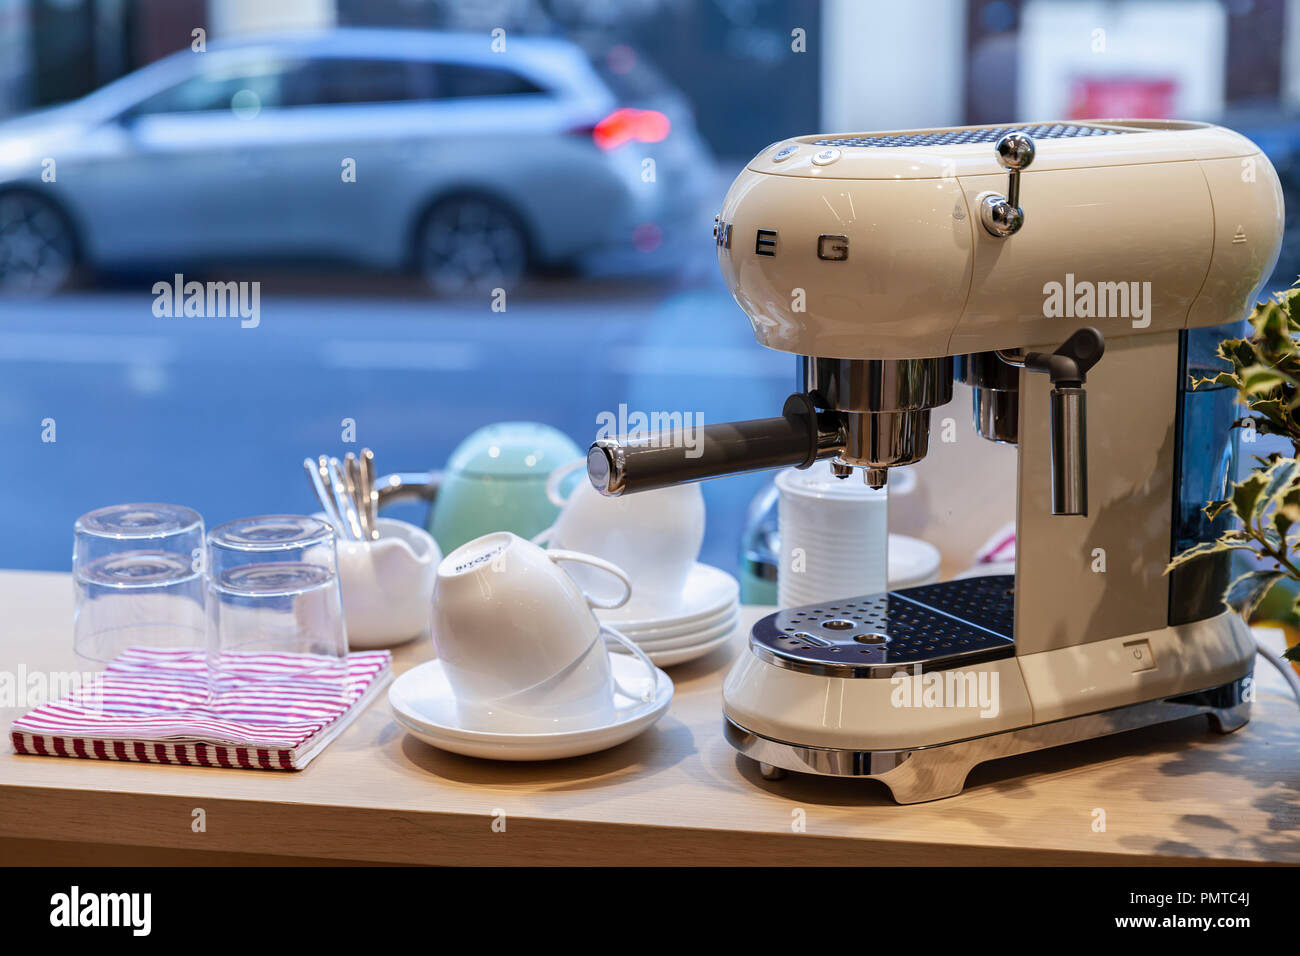 Milan, Italy - January 19, 2018: White Espresso Coffee maker by Smeg. It is an Italian manufacturer of upmarket domestic appliances Stock Photo